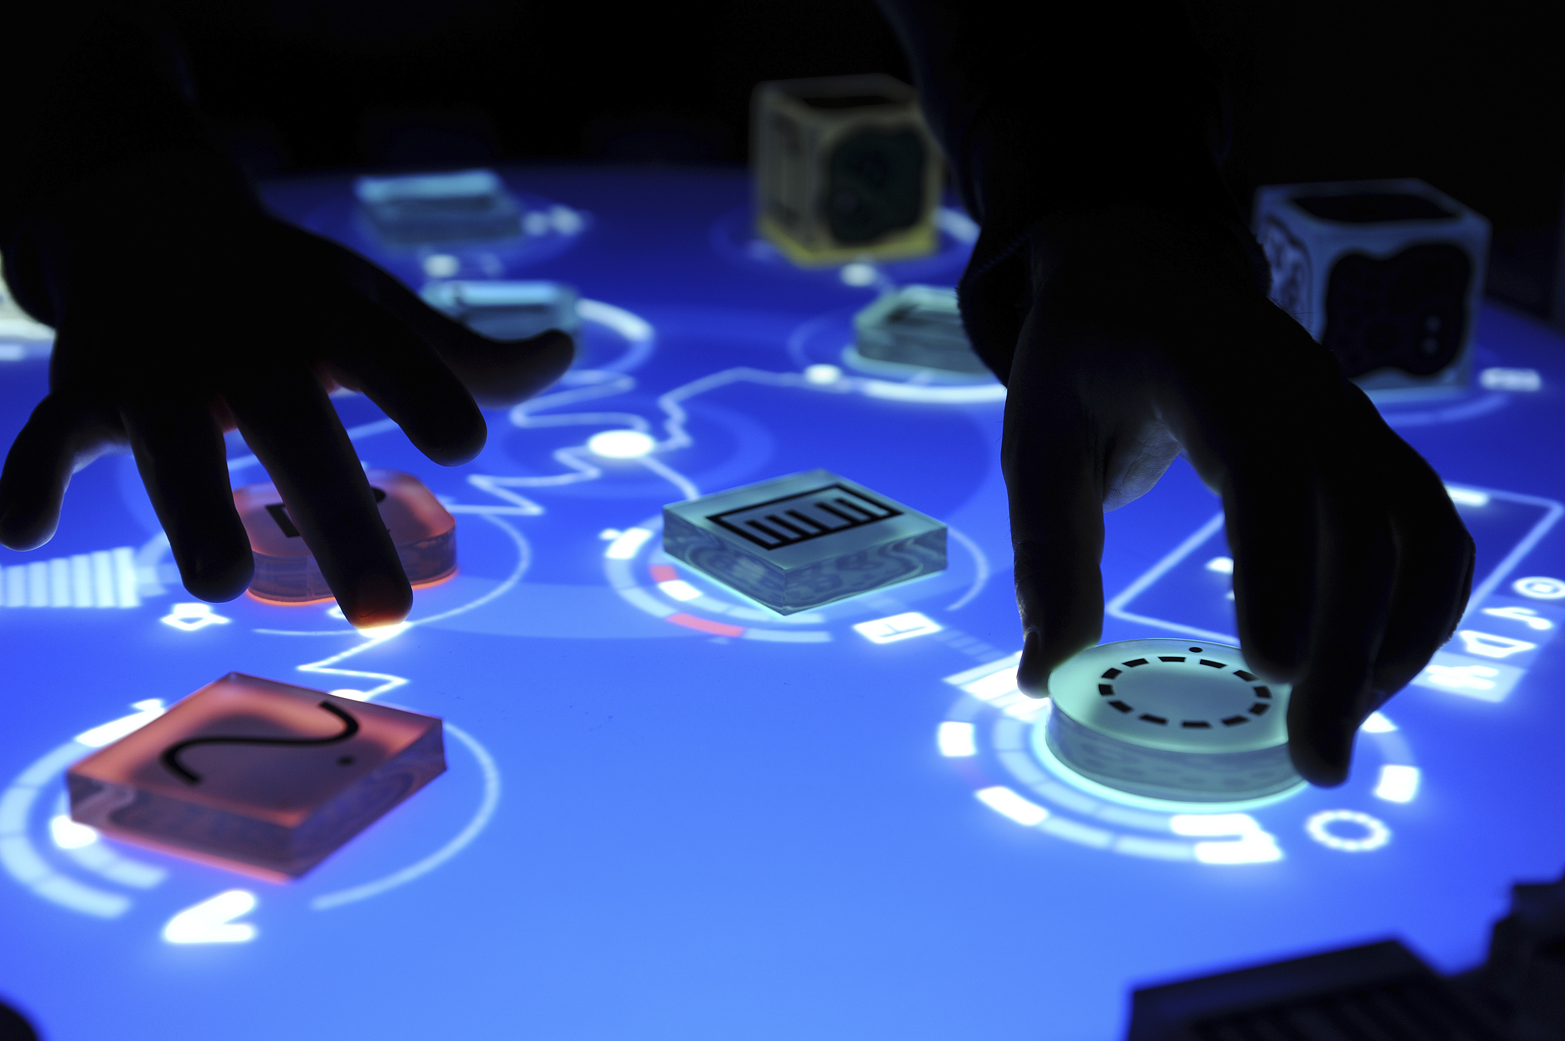 The Reactable is a musical instrument with a tangible interface (image: Reactable/Massimo Boldrin).